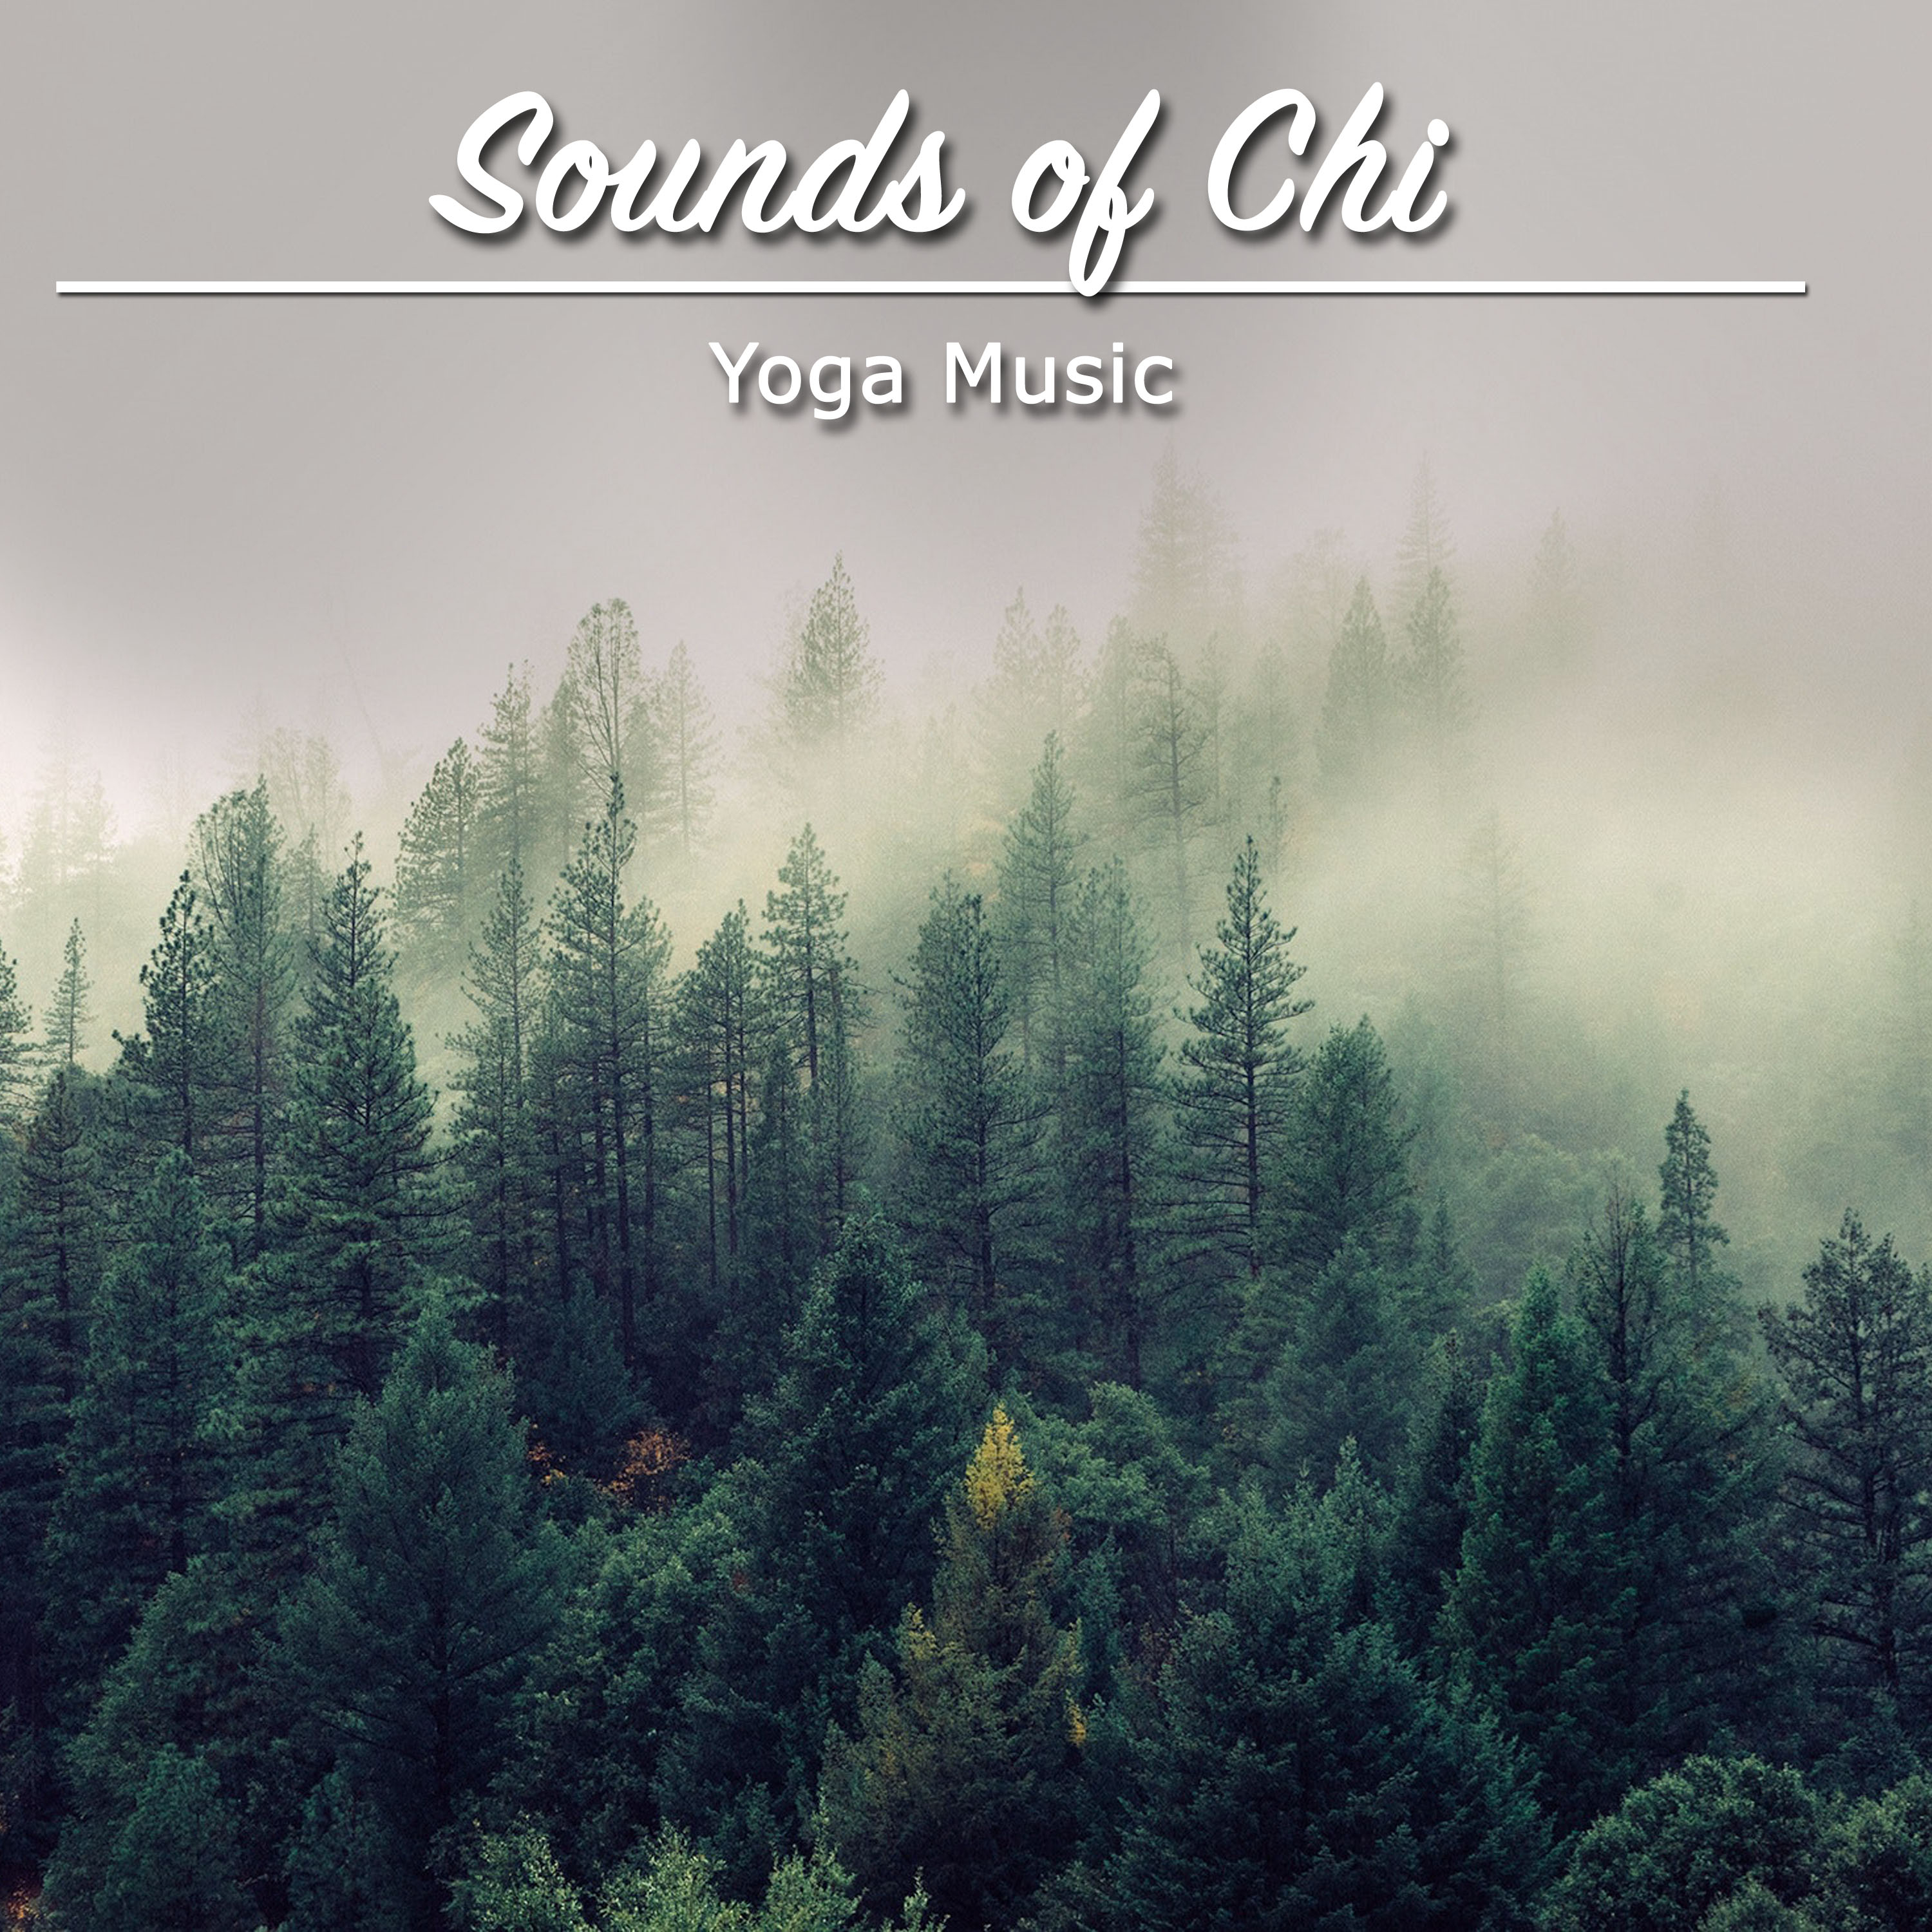 14 Sounds of Chi: Yoga Music